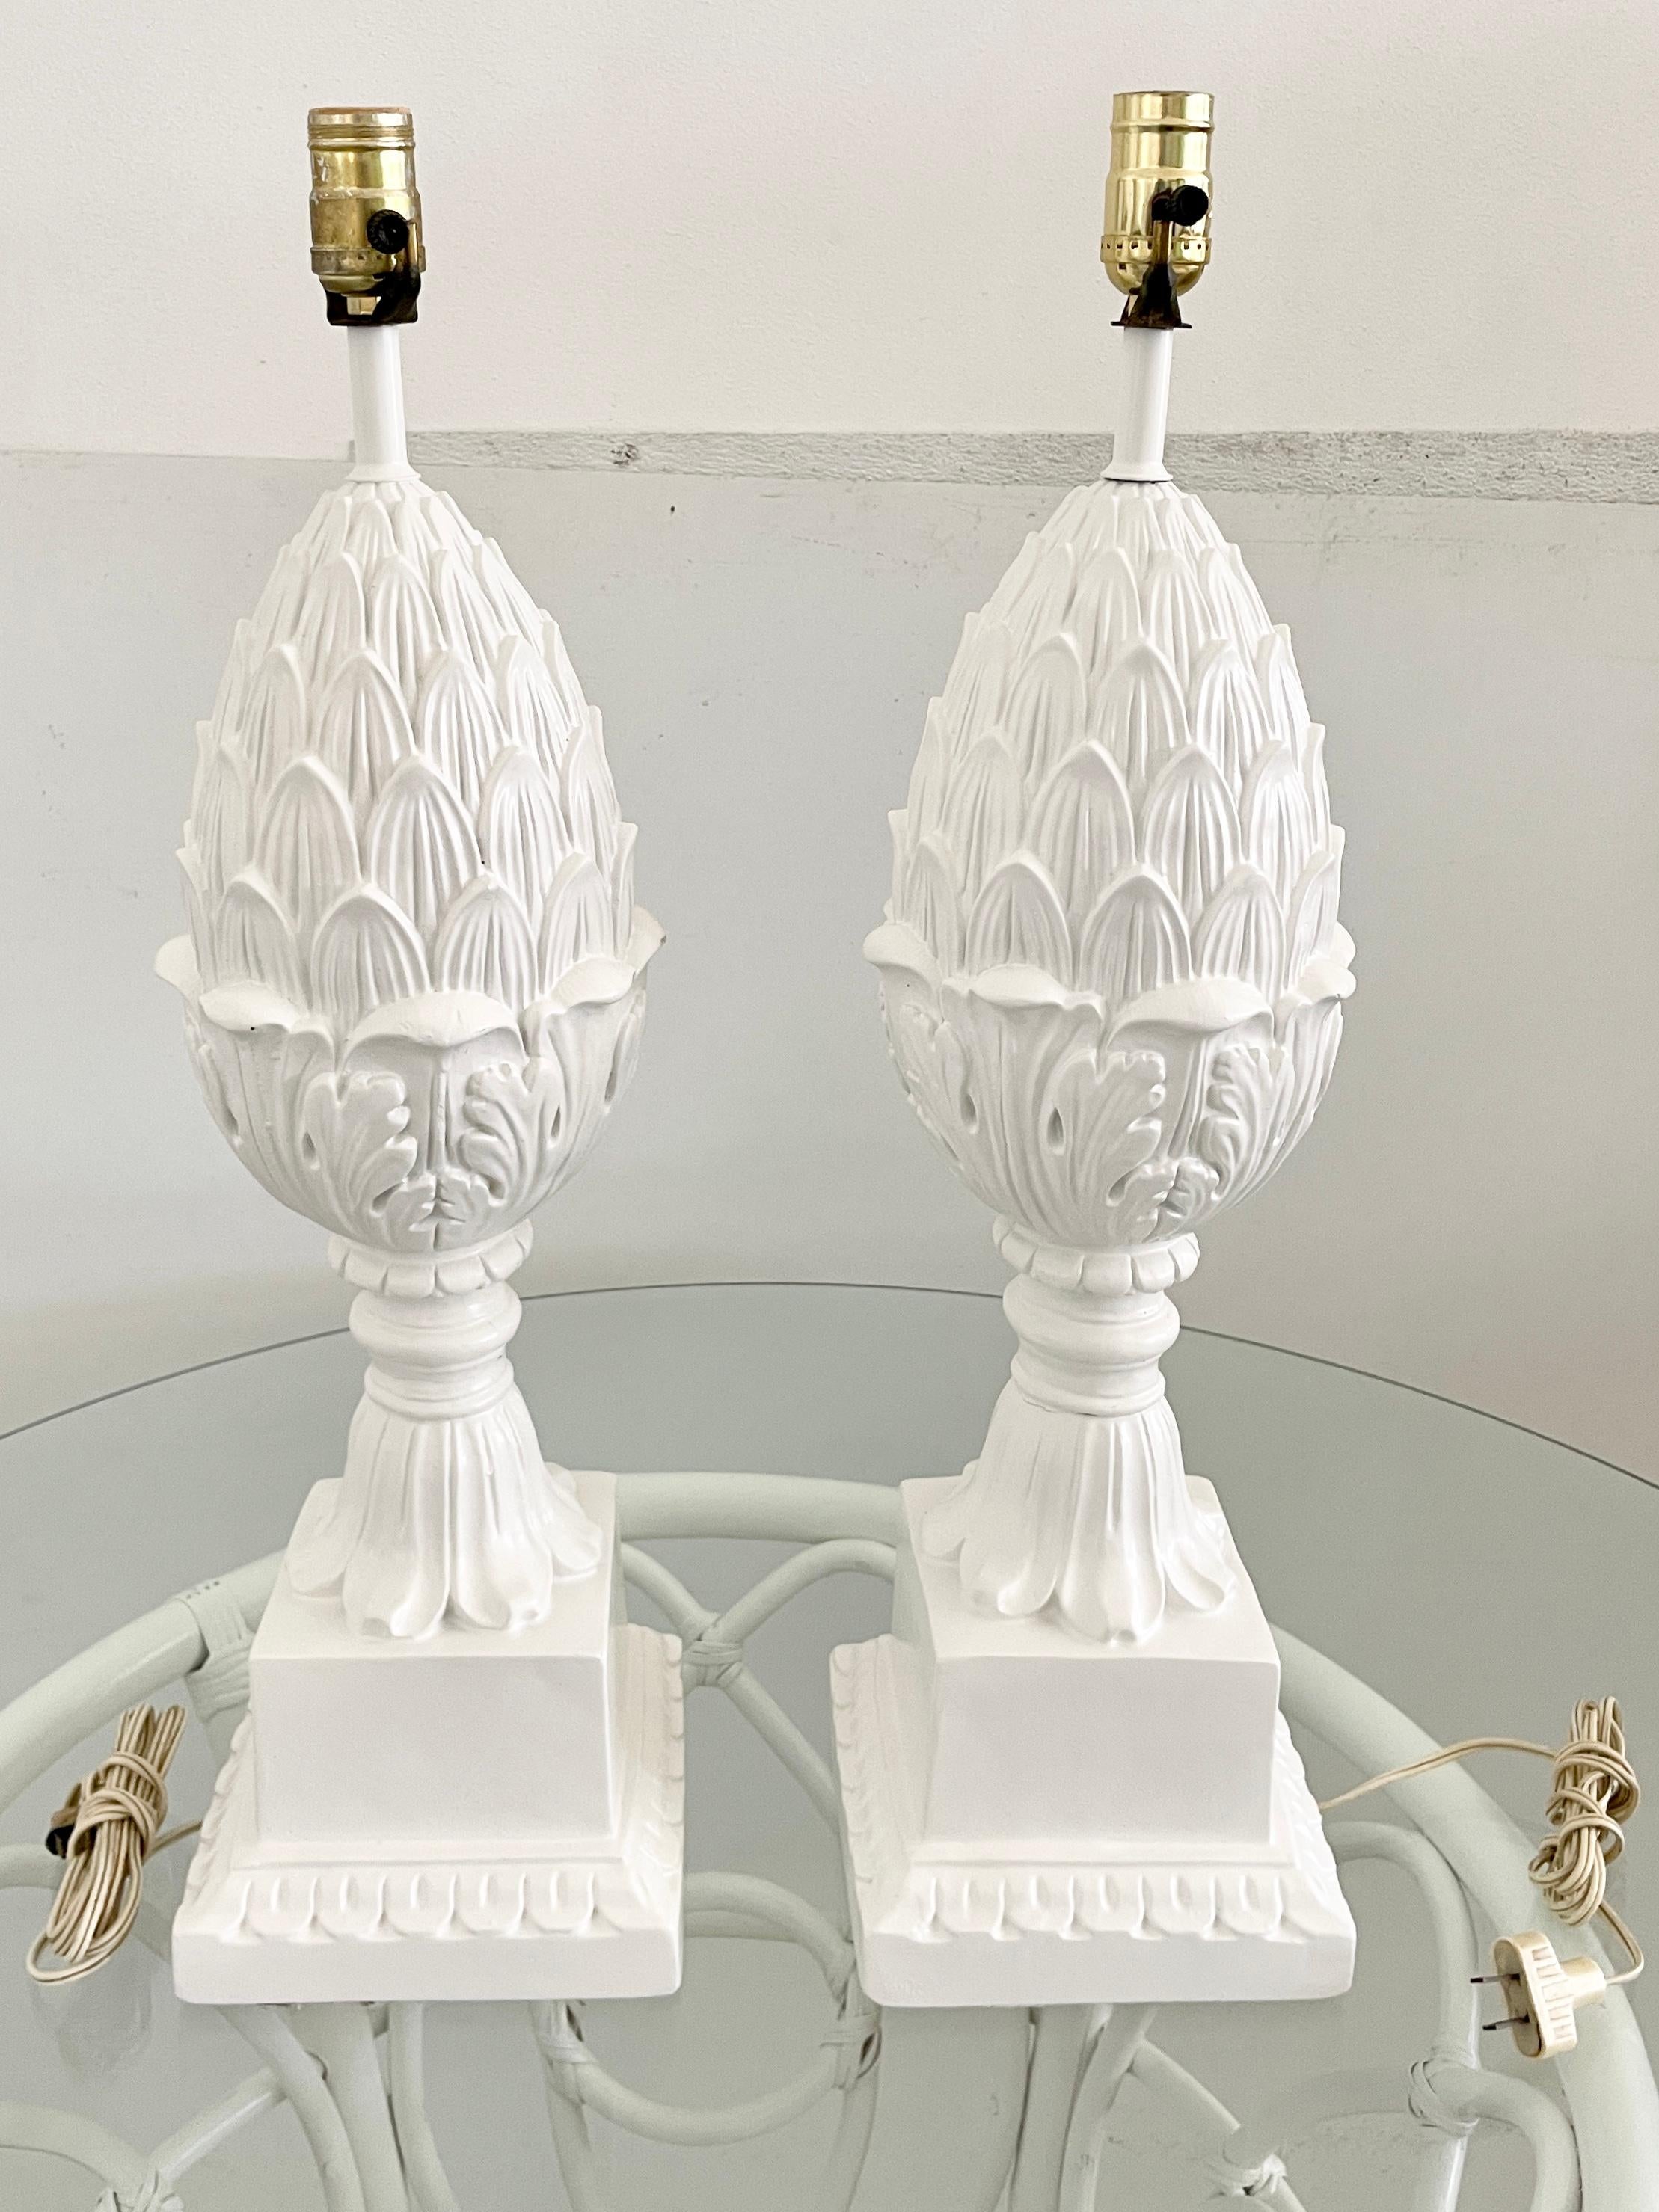 Mid-20th Century Boho Chic Pineapple Table Lamps, a Pair For Sale